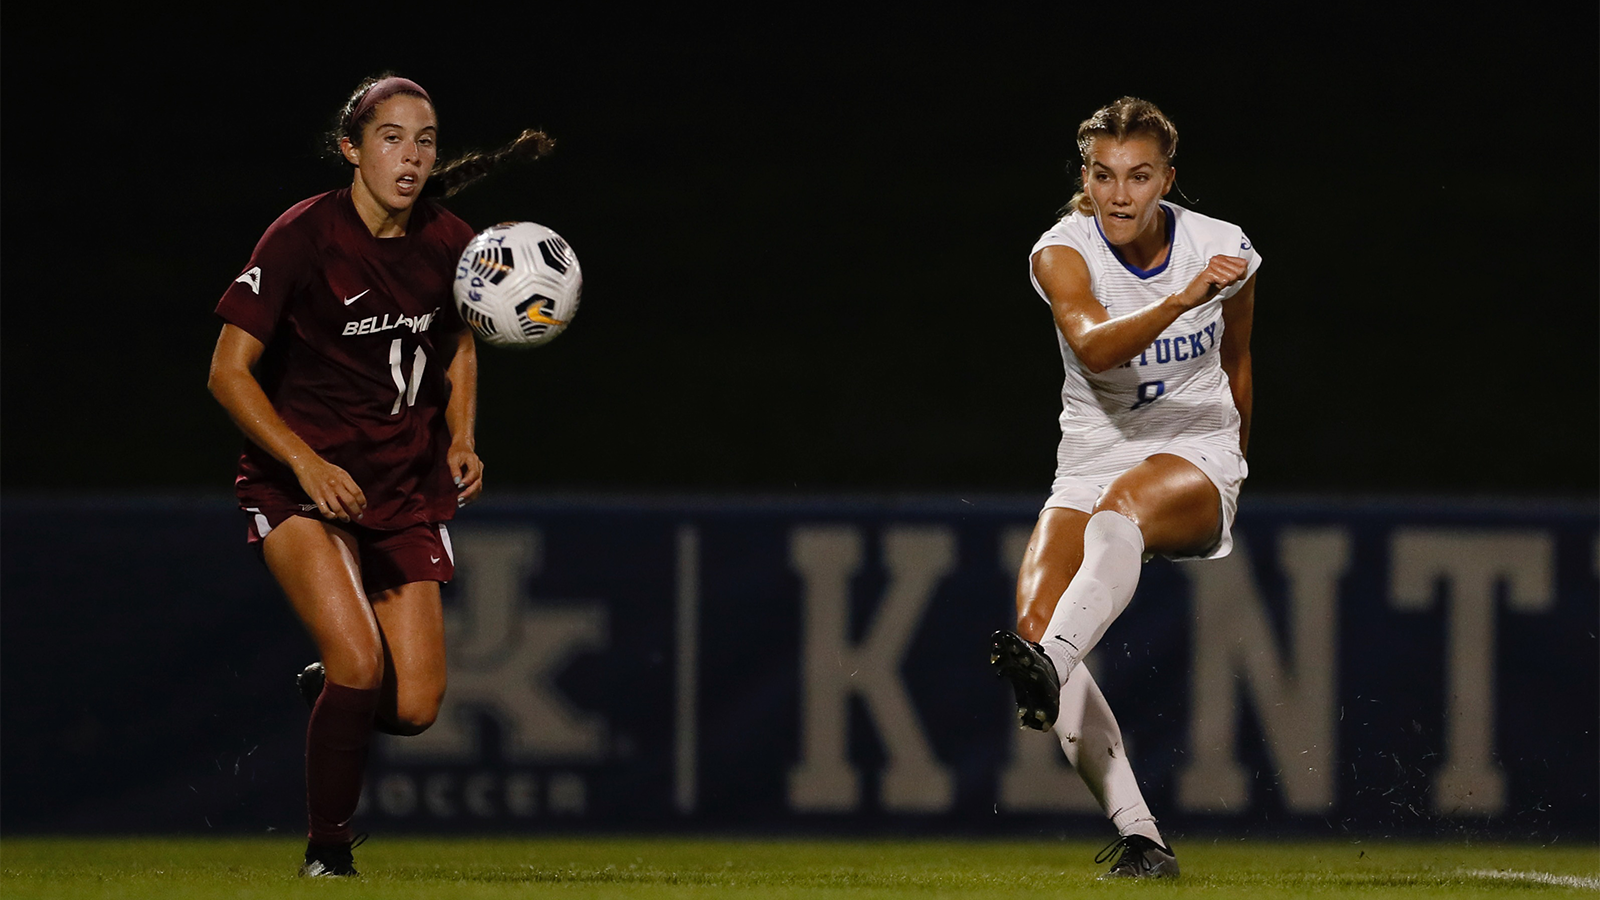 Kentucky Shuts Out Bellarmine, 4-0, In Non-Conference Finale